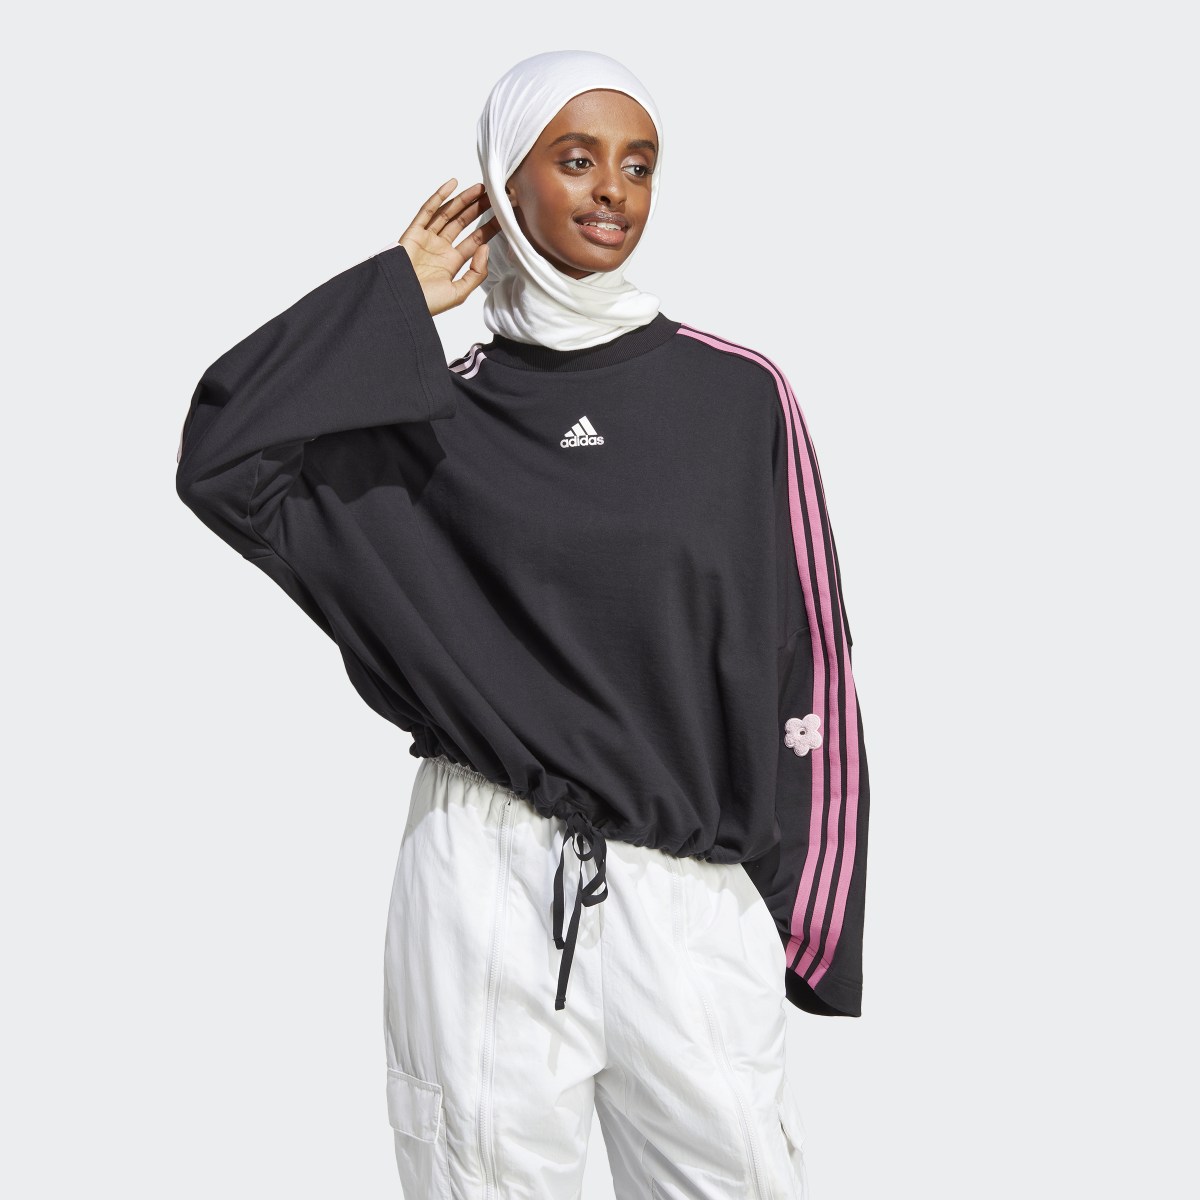 Adidas 3-Stripes Sweatshirt with Chenille Flower Patches. 4